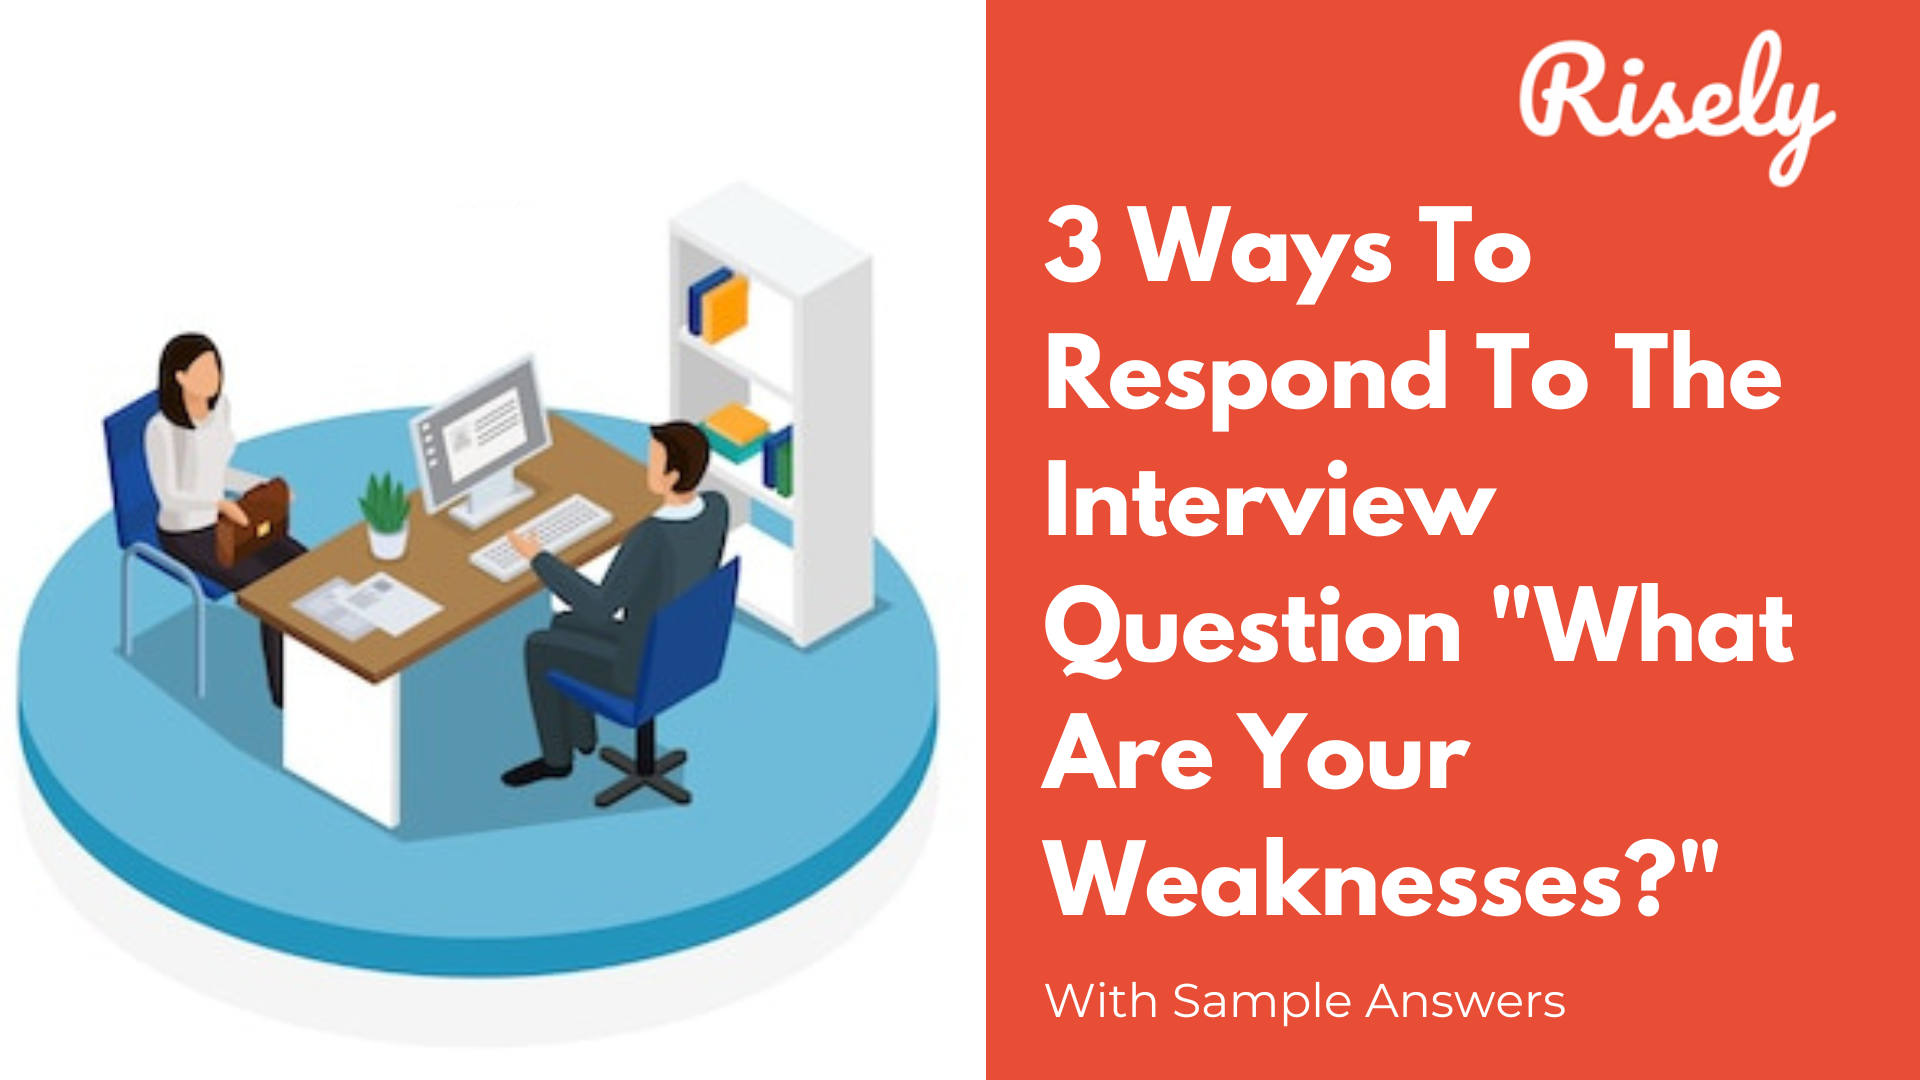 3 Ways To Respond To The Interview Question “What Are Your Weaknesses?”